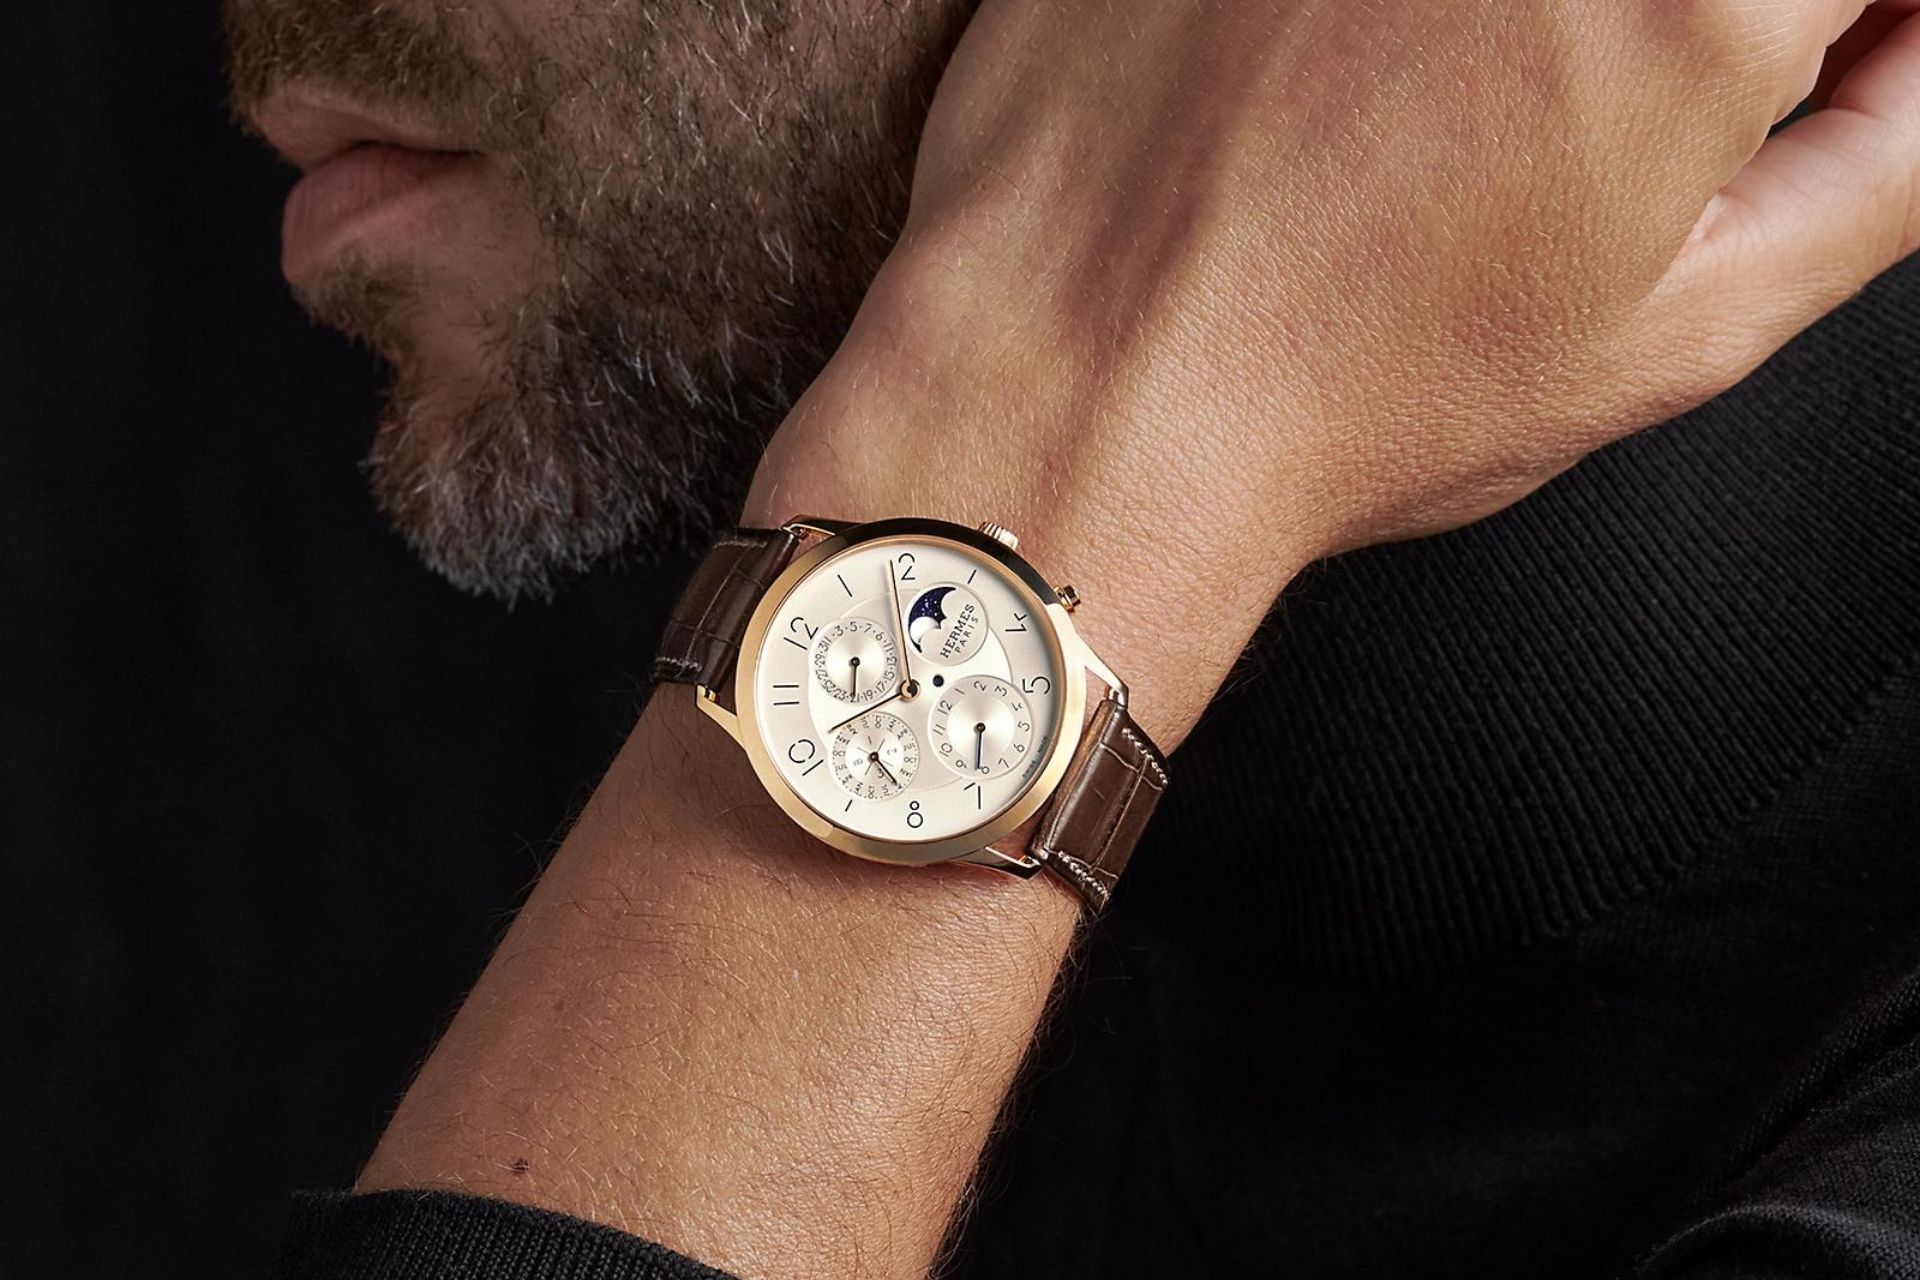 Cartier, Chanel, Chopard, Gucci, Hermès: 5 new exceptional luxury watches